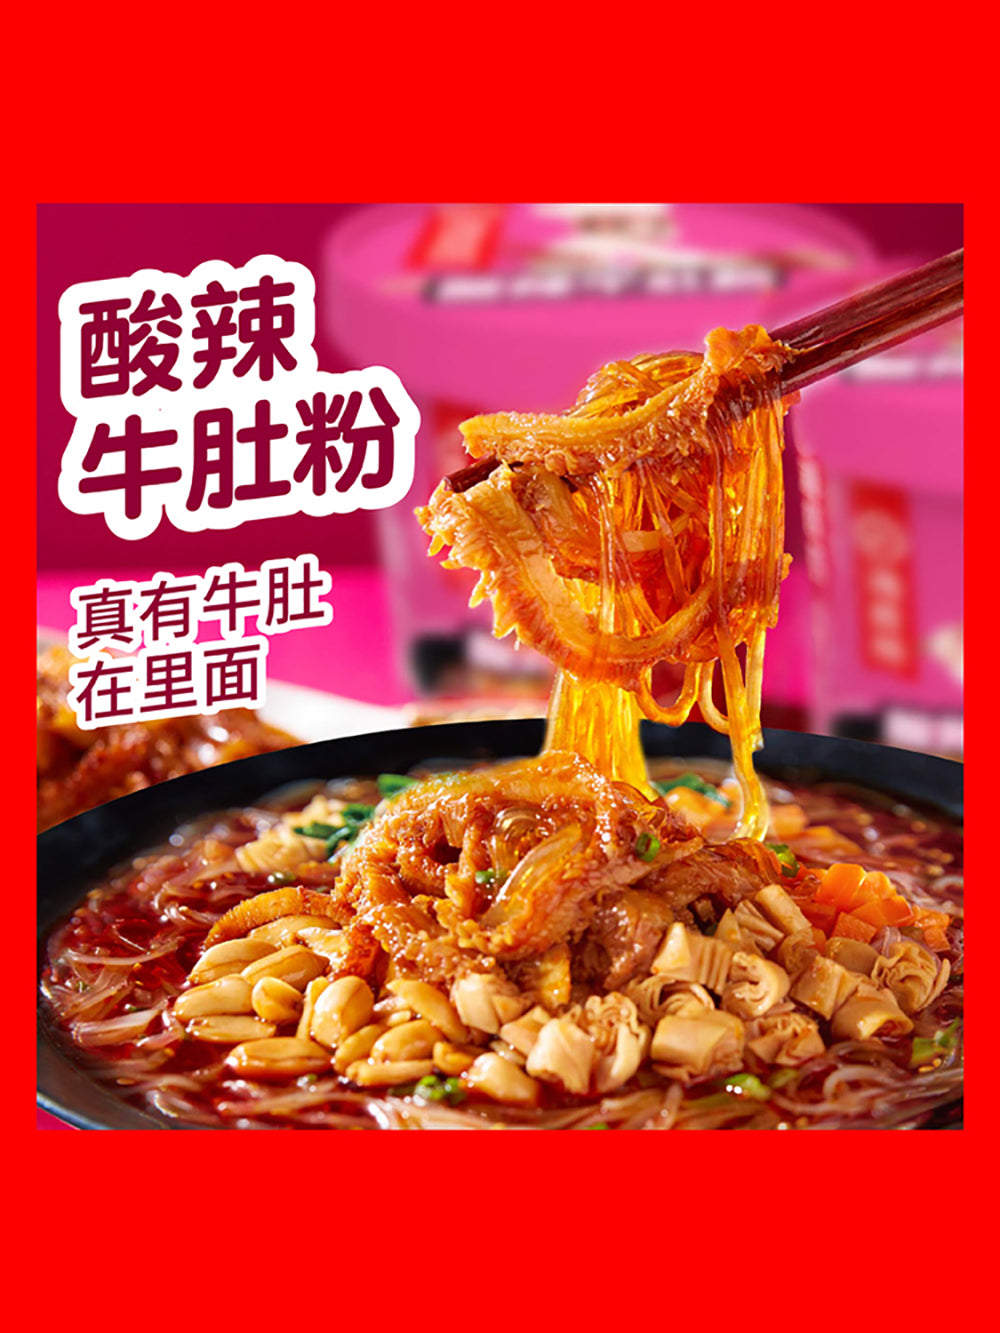 Haidilao-Hot-and-Sour-Beef-Tripe-Instant-Noodles,-136g-1